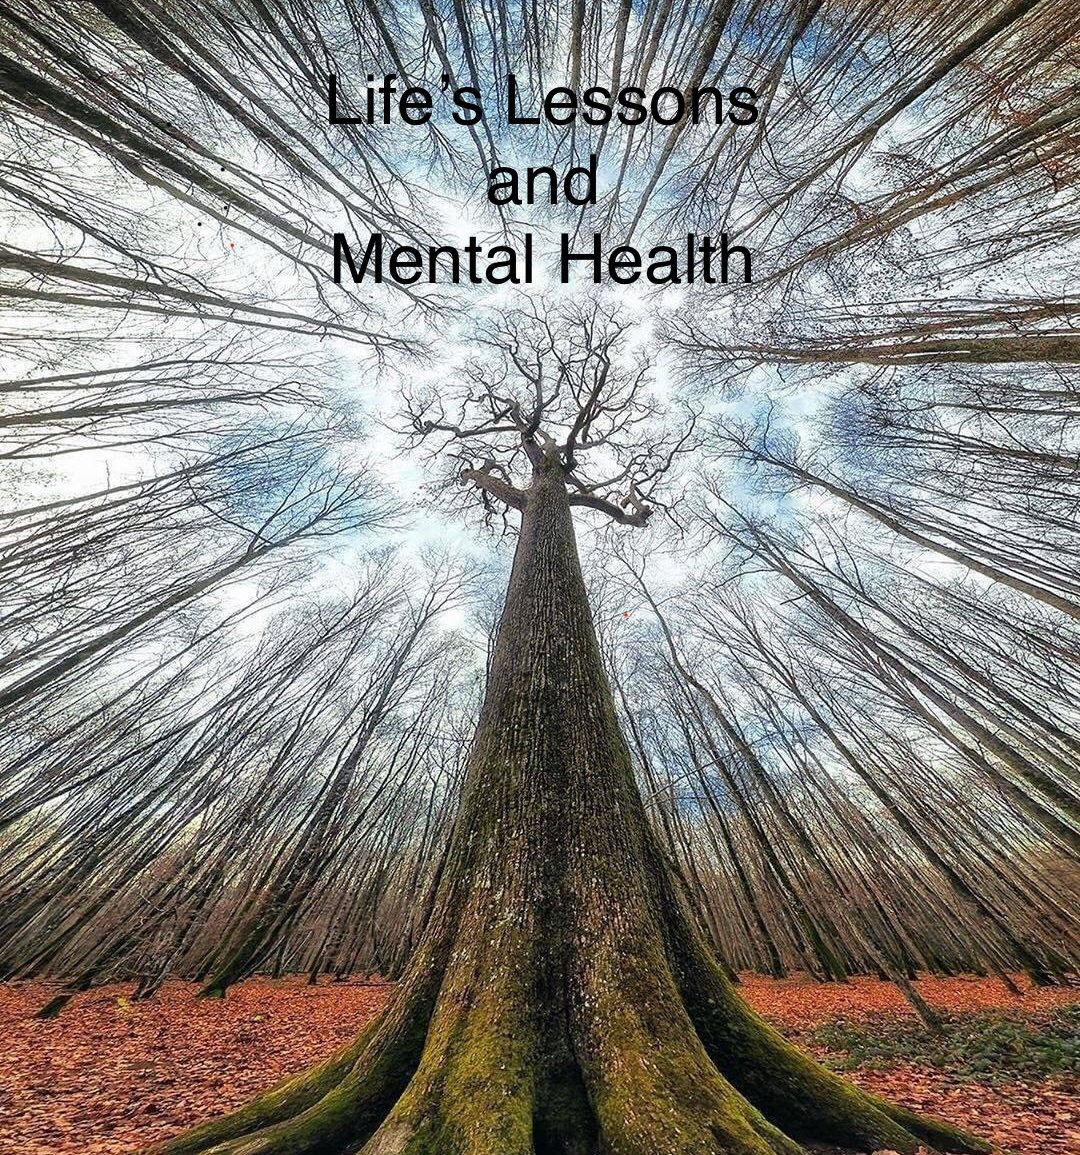 Life's Lessons and Mental Health